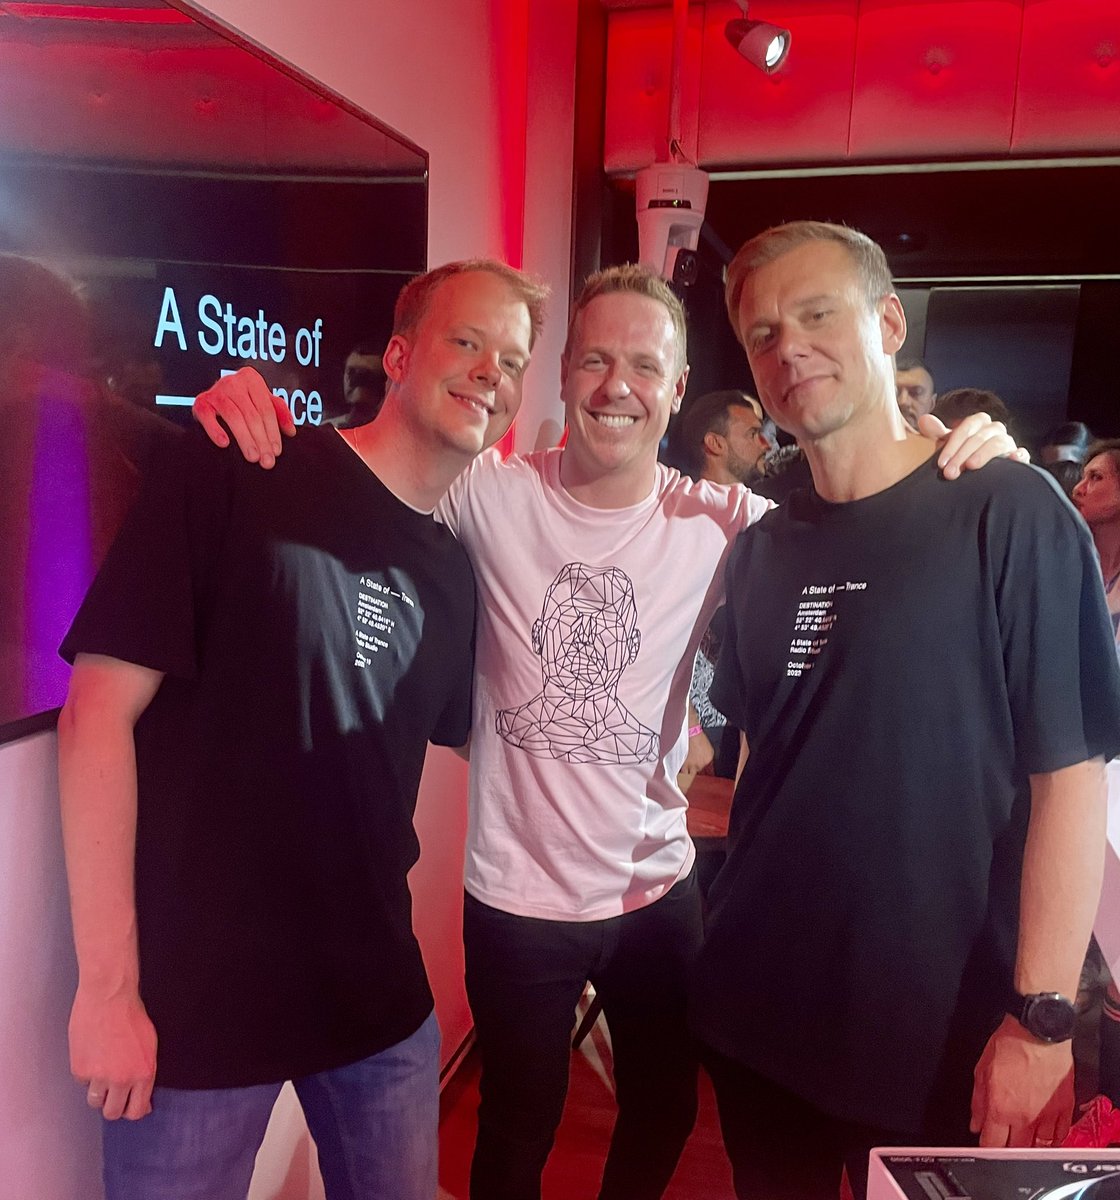 Always a pleasure playing some ID’s for you guys live from the ASOT studio! Absolute vibe yesterday! Thanks for having me 🙏🏻🌷 @rubenderonde @arminvanbuuren @FerryCorsten @asot #ADE